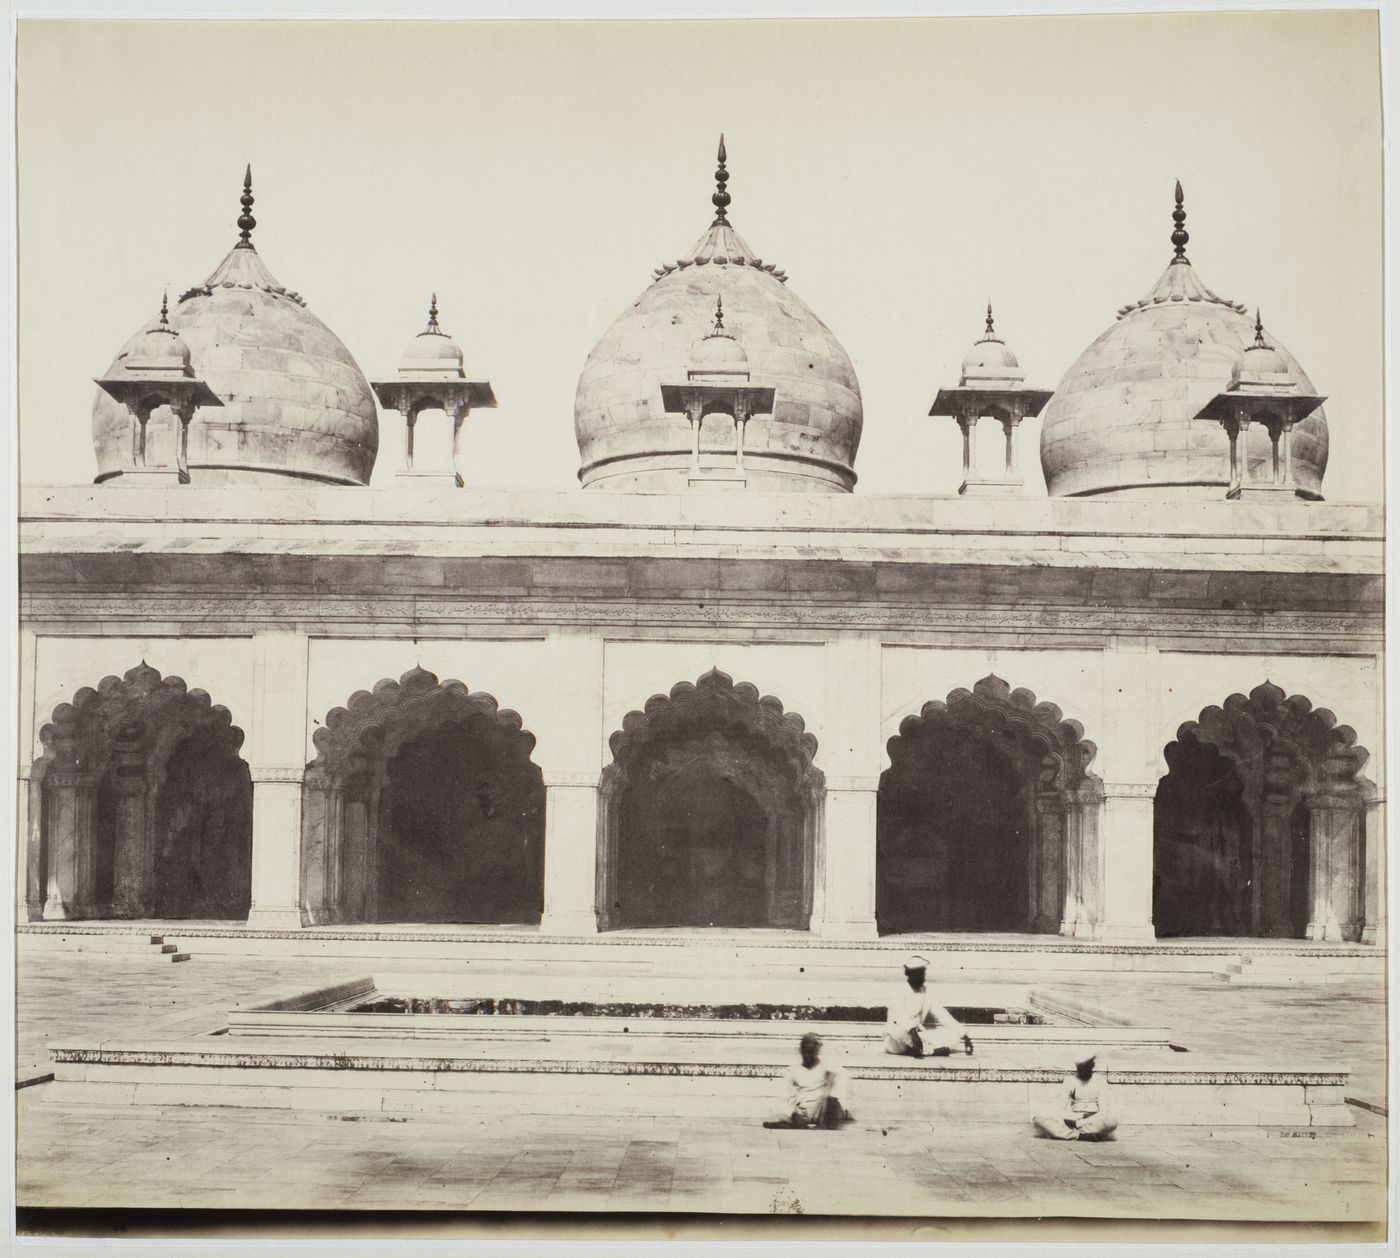 Panorama of the Moti Masjid [Pearl Mosque] showing the façade, Agra Fort, Agra, India